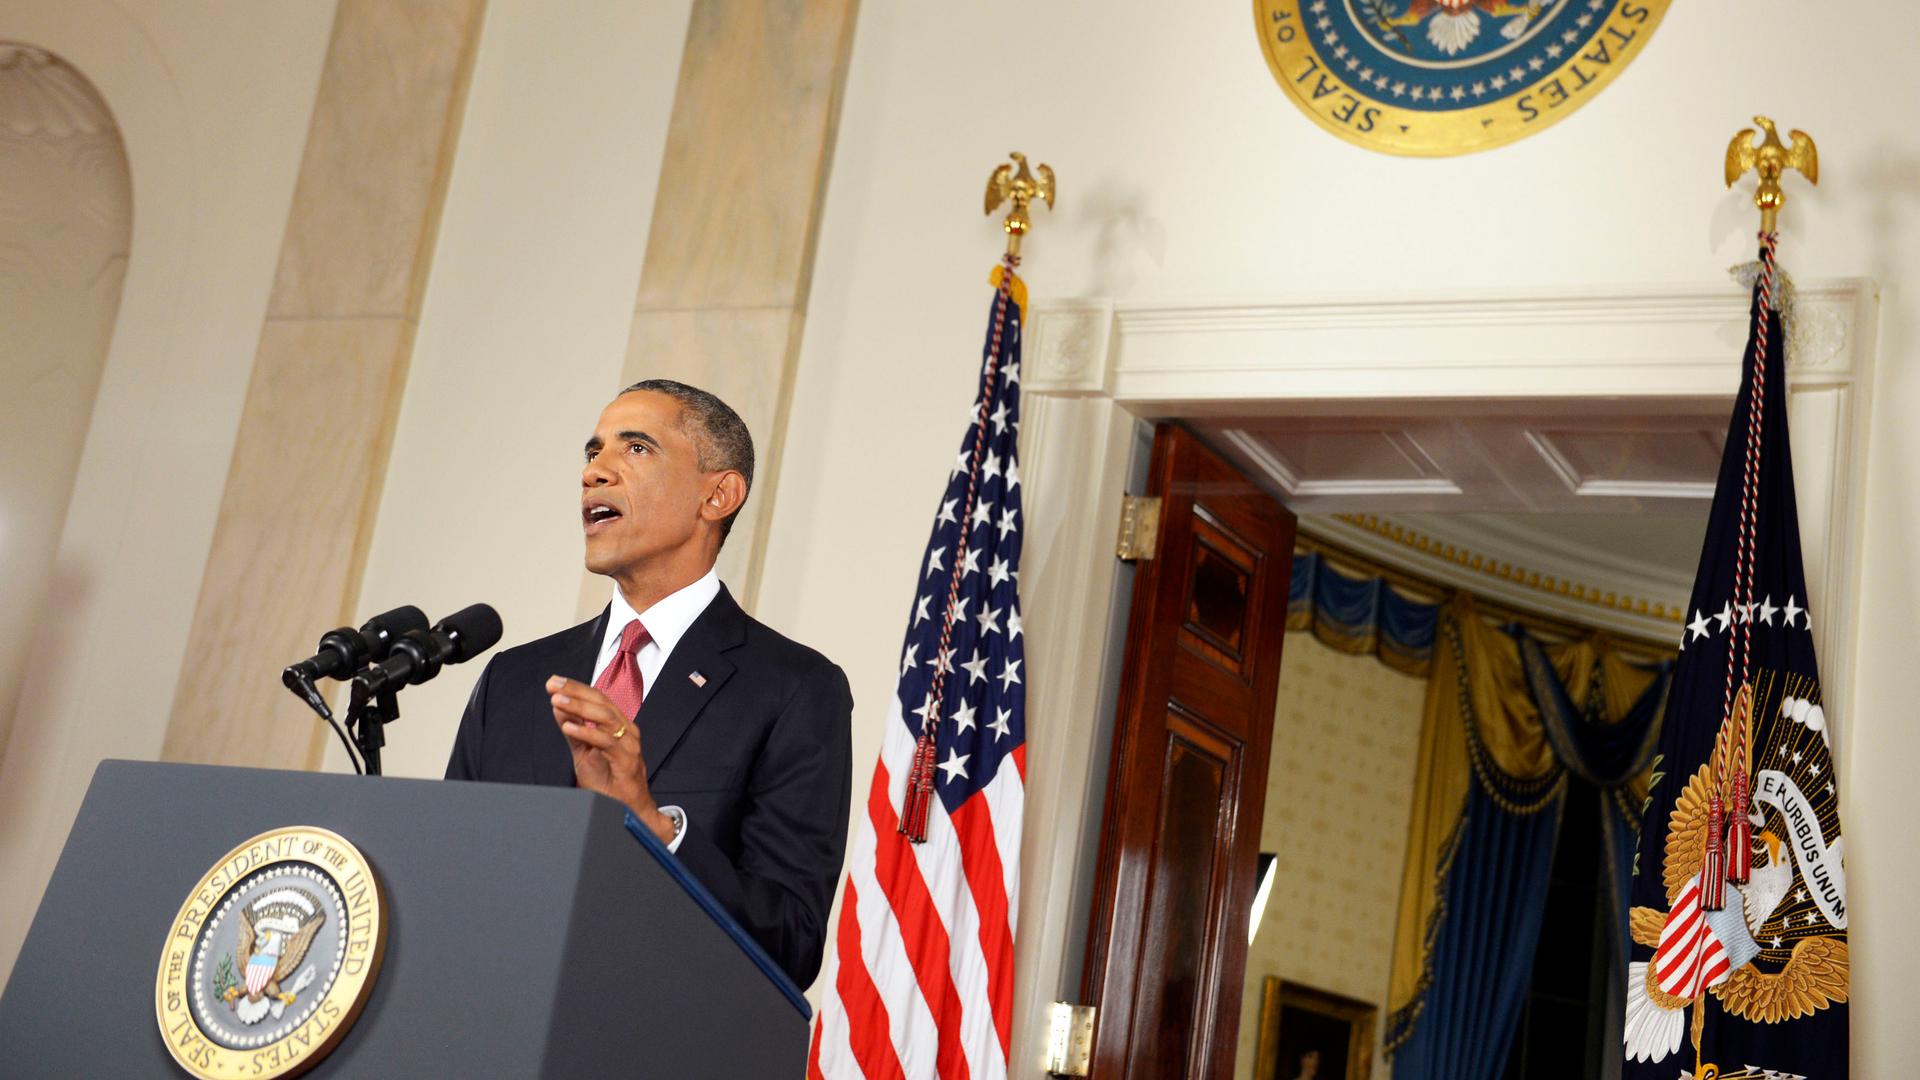 U.S. President Barack Obama delivers a live televised address to the nation on his plans for military action against the Islamic State on September 10, 2014.